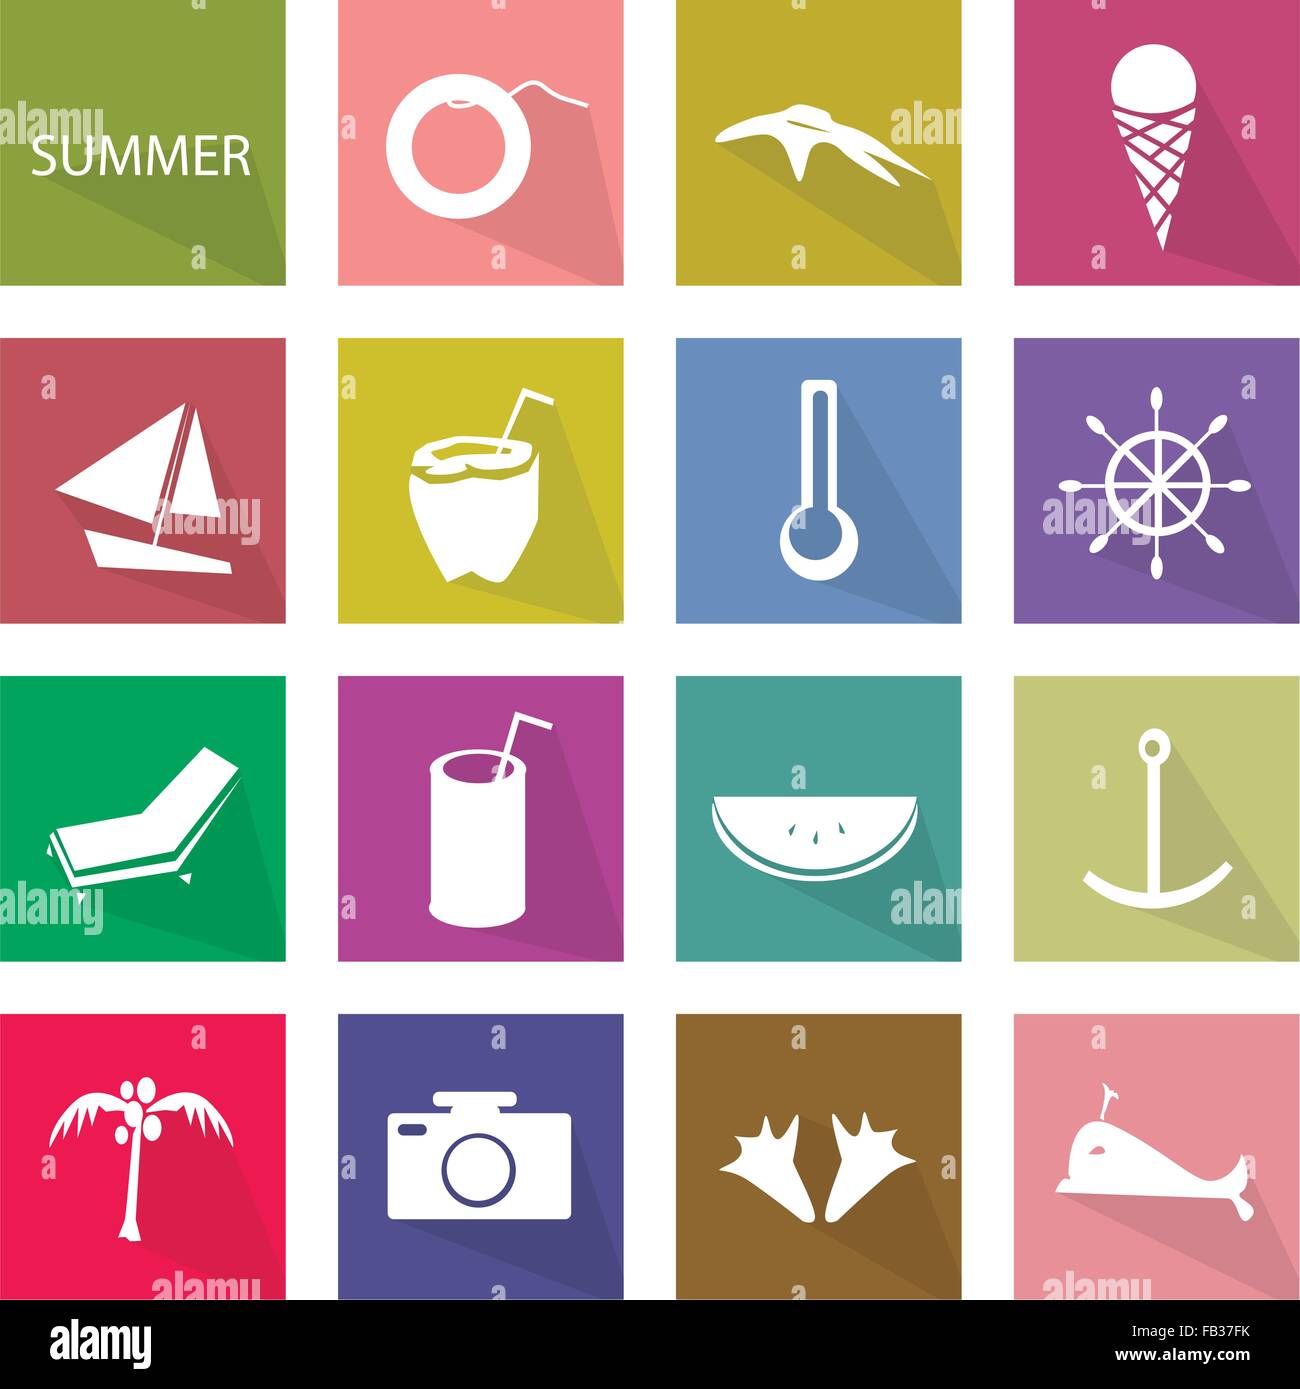 Illustration Collection of Summer Season Icons, The Hottest of The Four Temperate Seasons. Stock Vector